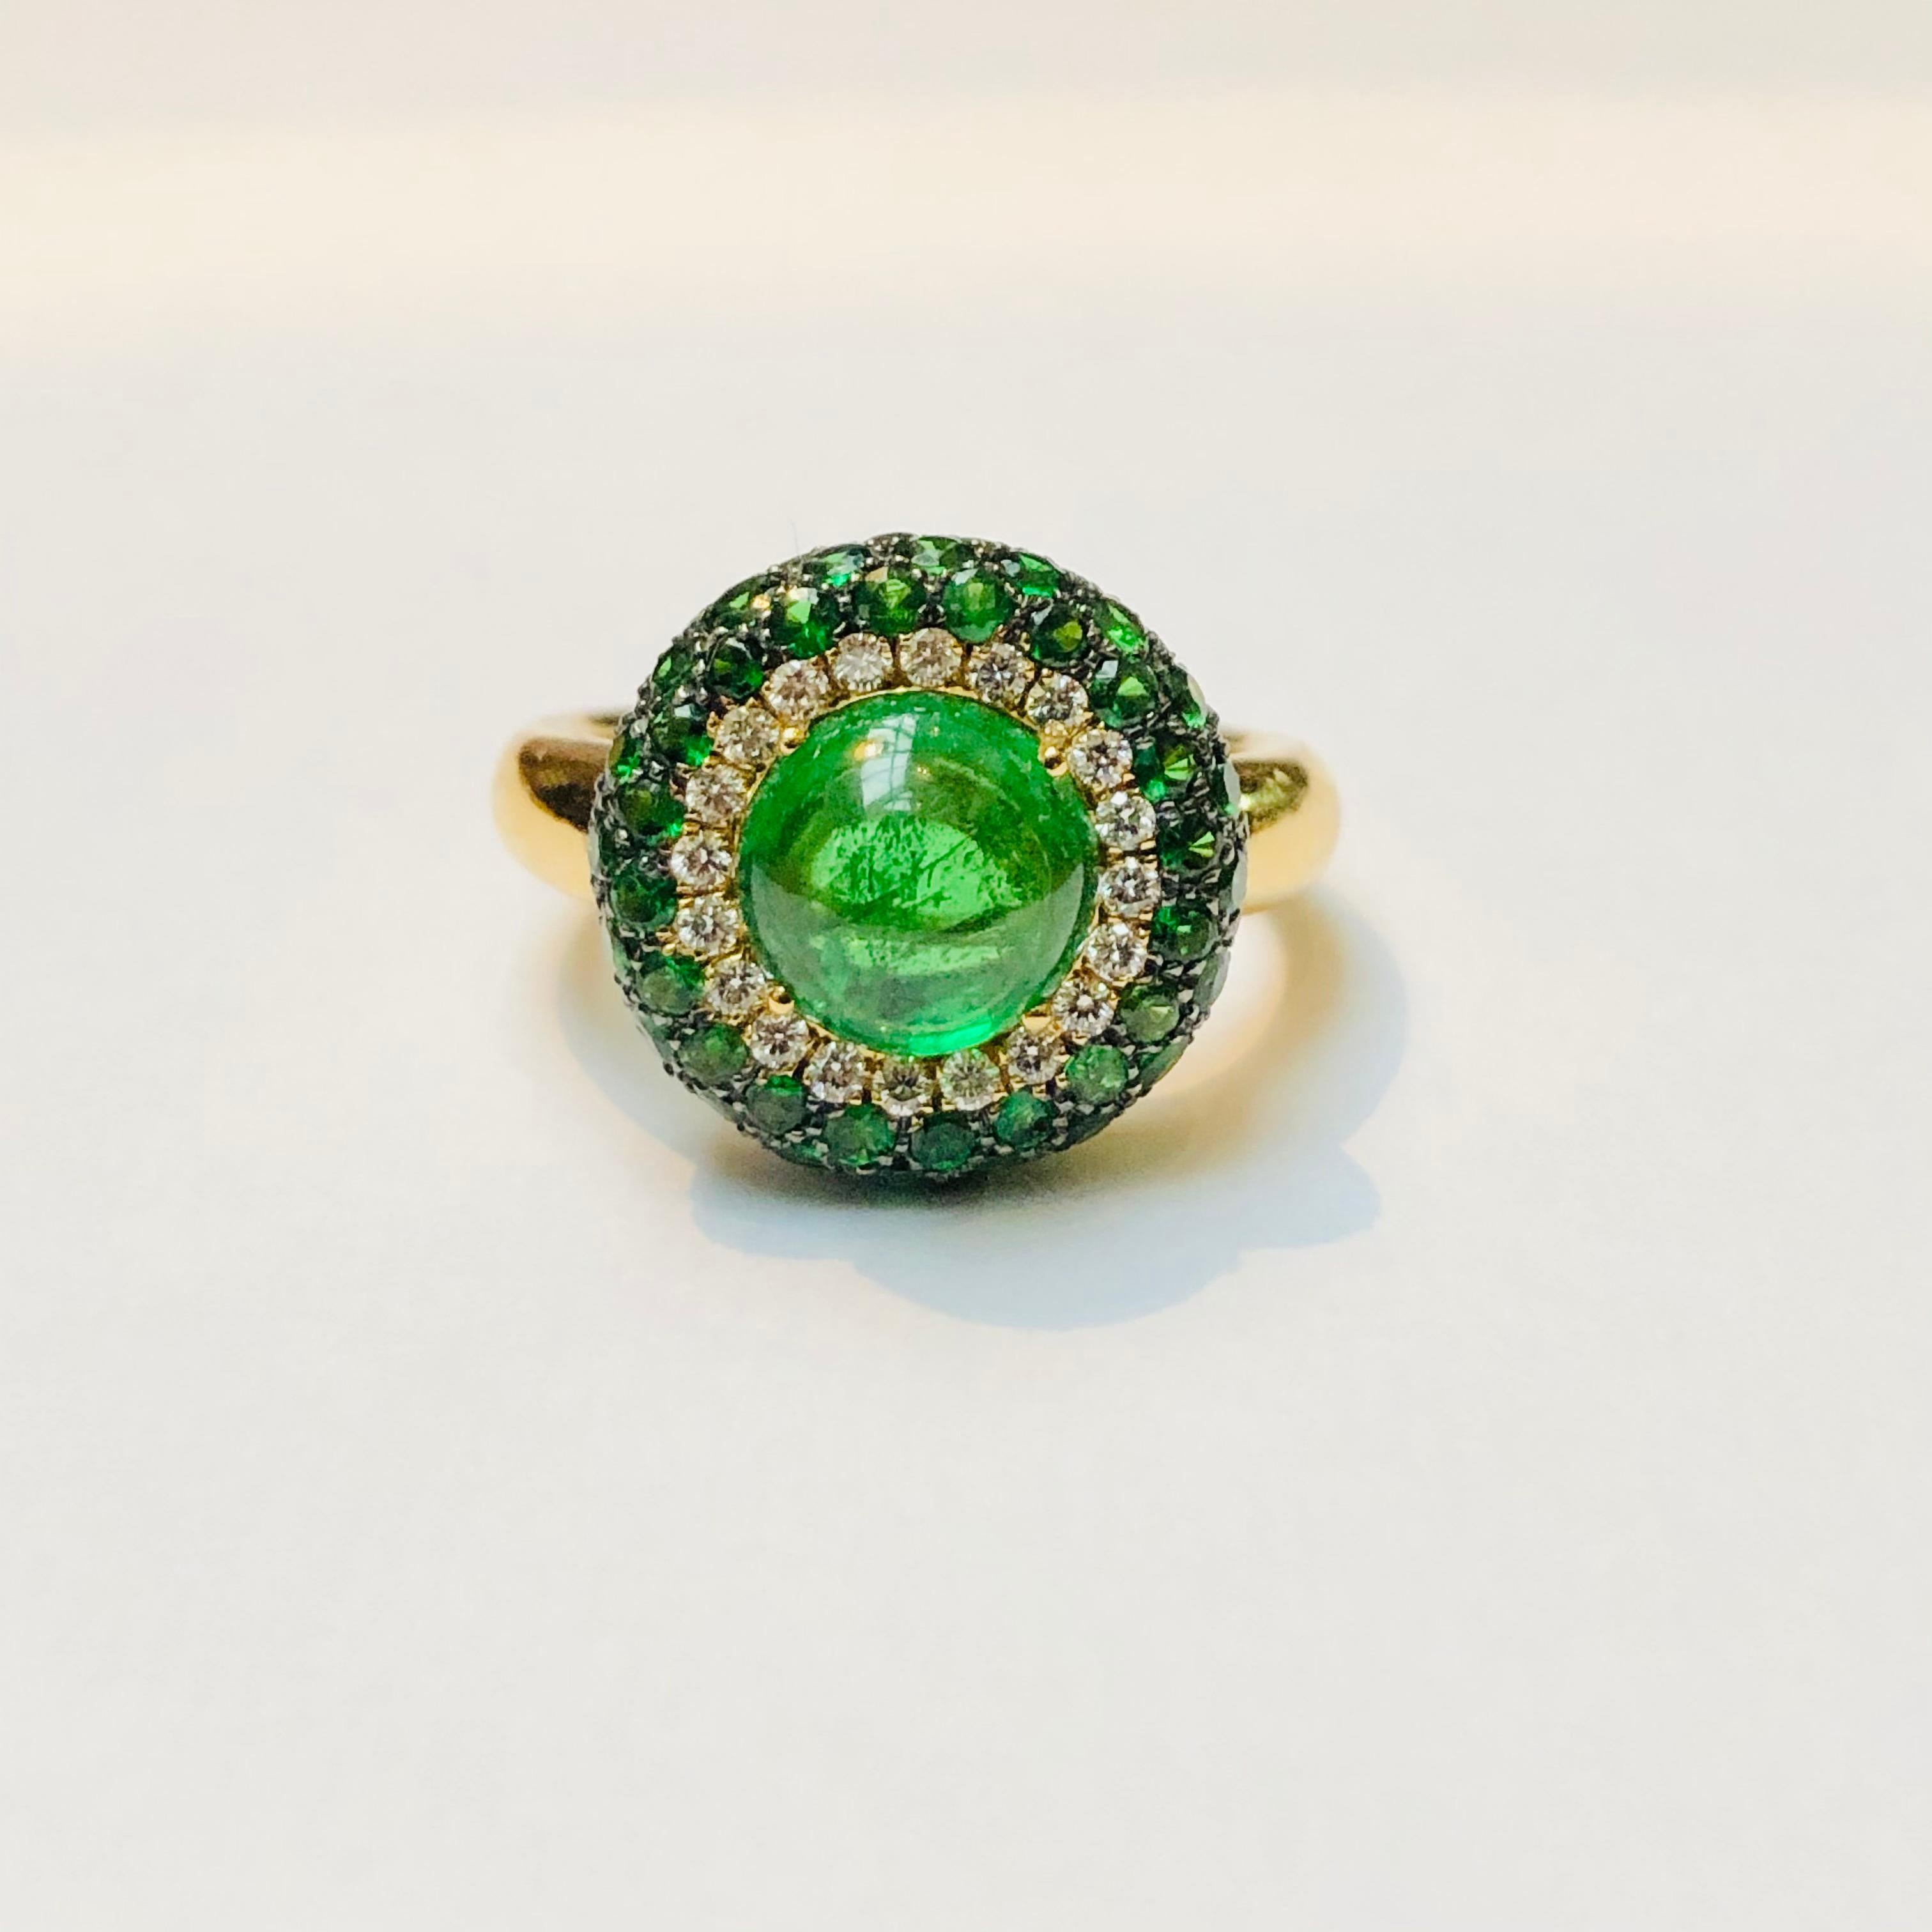 Contemporary Tsavorite Cabochon Cocktail Ring, 18 Carat Yellow Gold, Made in Italy For Sale